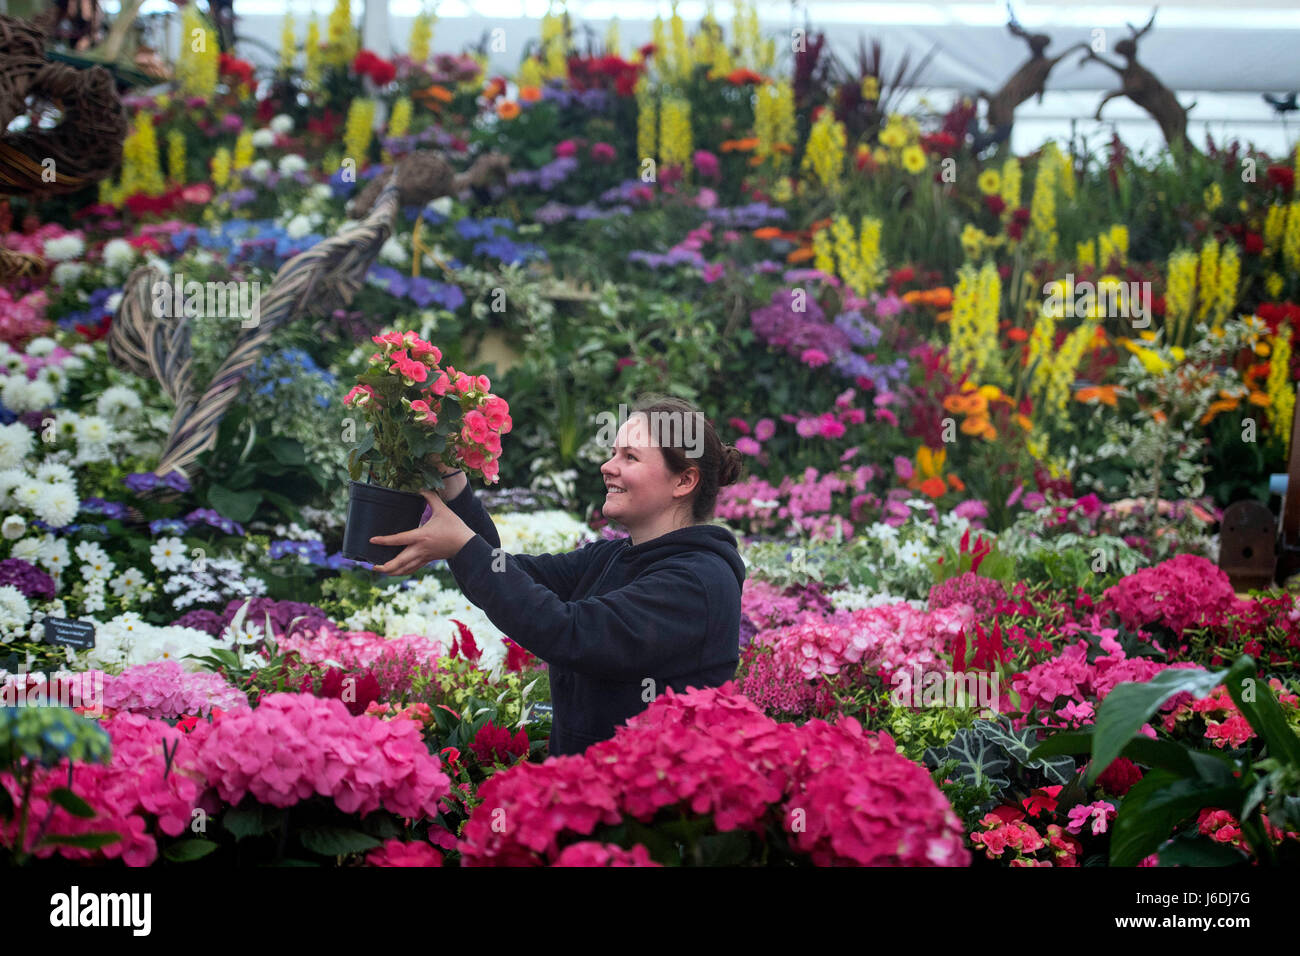 Charlotte Oakes makes the final floral arrangements on the Birmingham City Council display during preparations for the RHS Chelsea Flower Show 2017 at the Royal Hospital Chelsea in London. Stock Photo